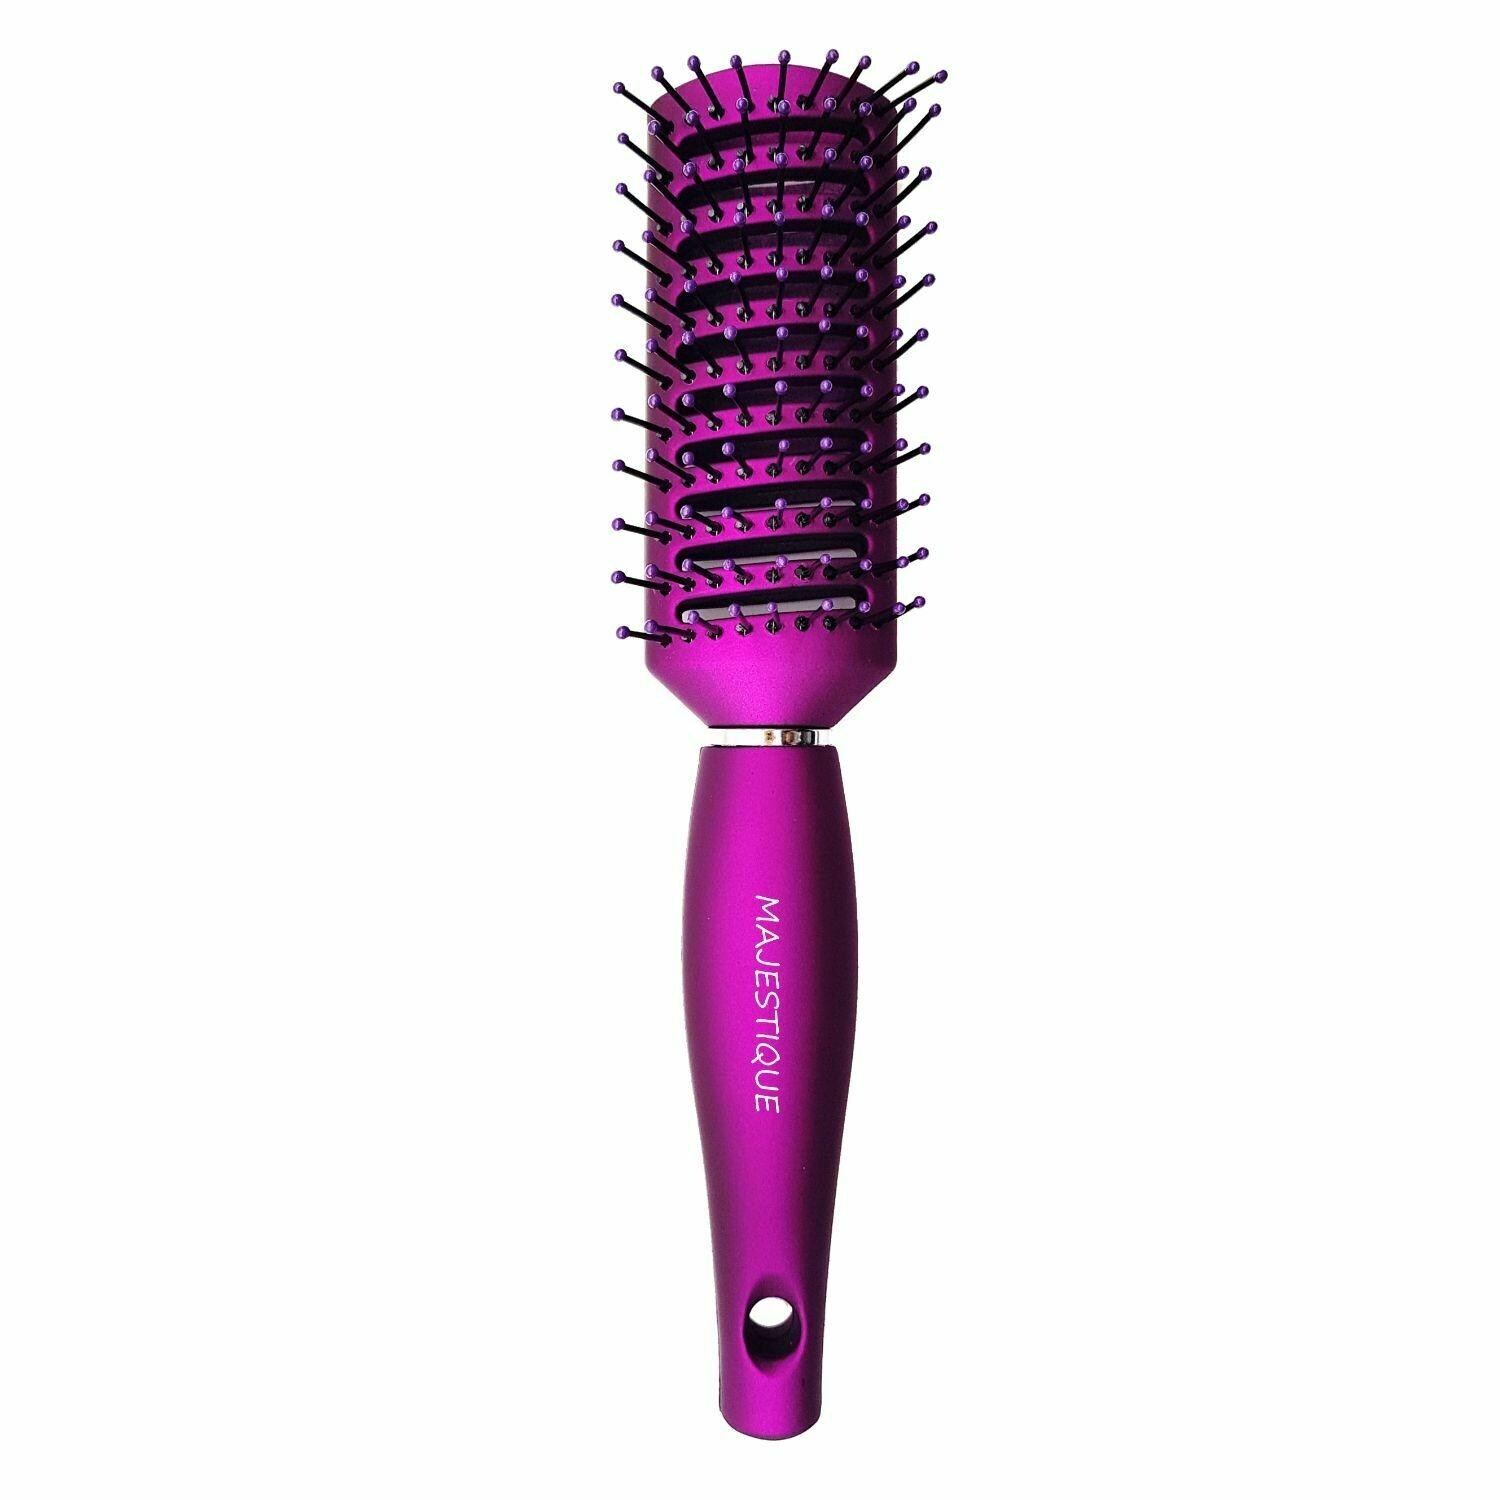 Majestique Vented Hair Brush 9 Row Purple Series - Vente Hairbrush for Men  and Women, Vent Brushes With Ball Tipped Bristles for Wet Short Curly  Straight Hair for Blow Drying & Hair